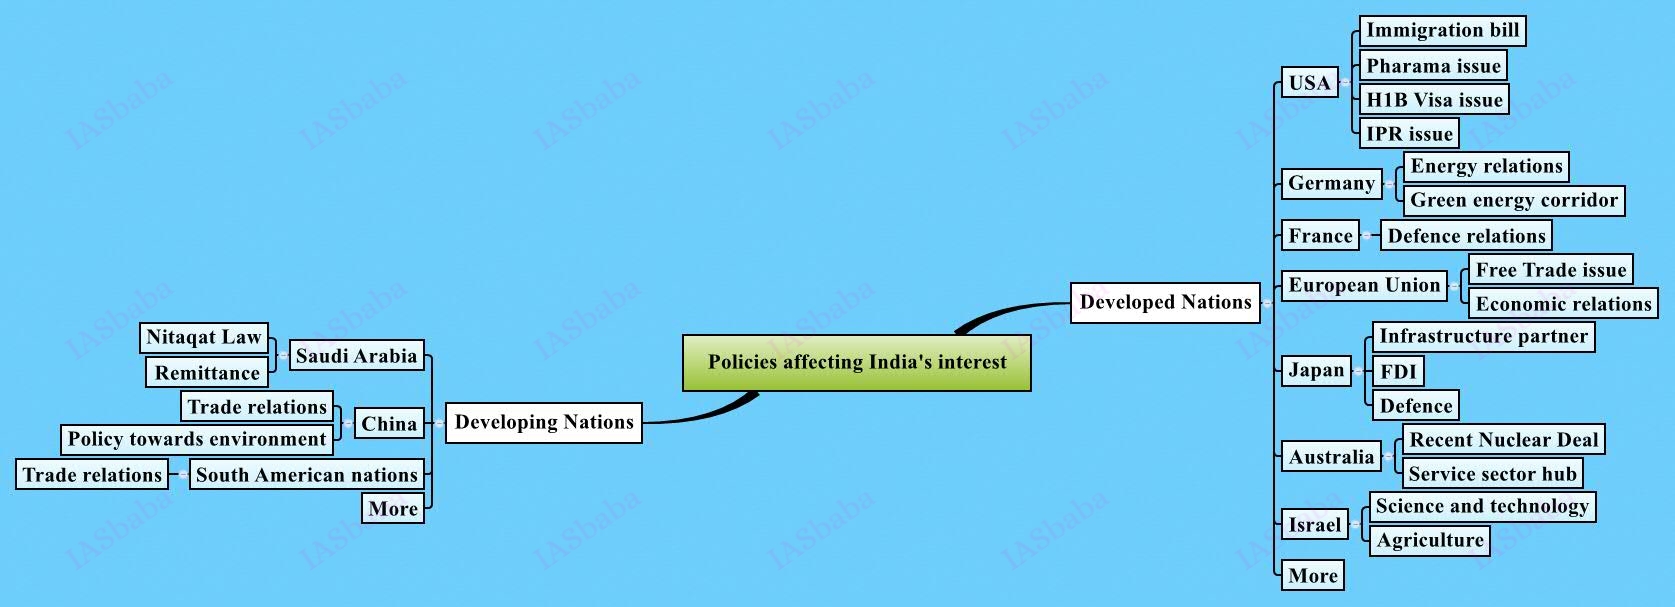 Policies affecting India's interest